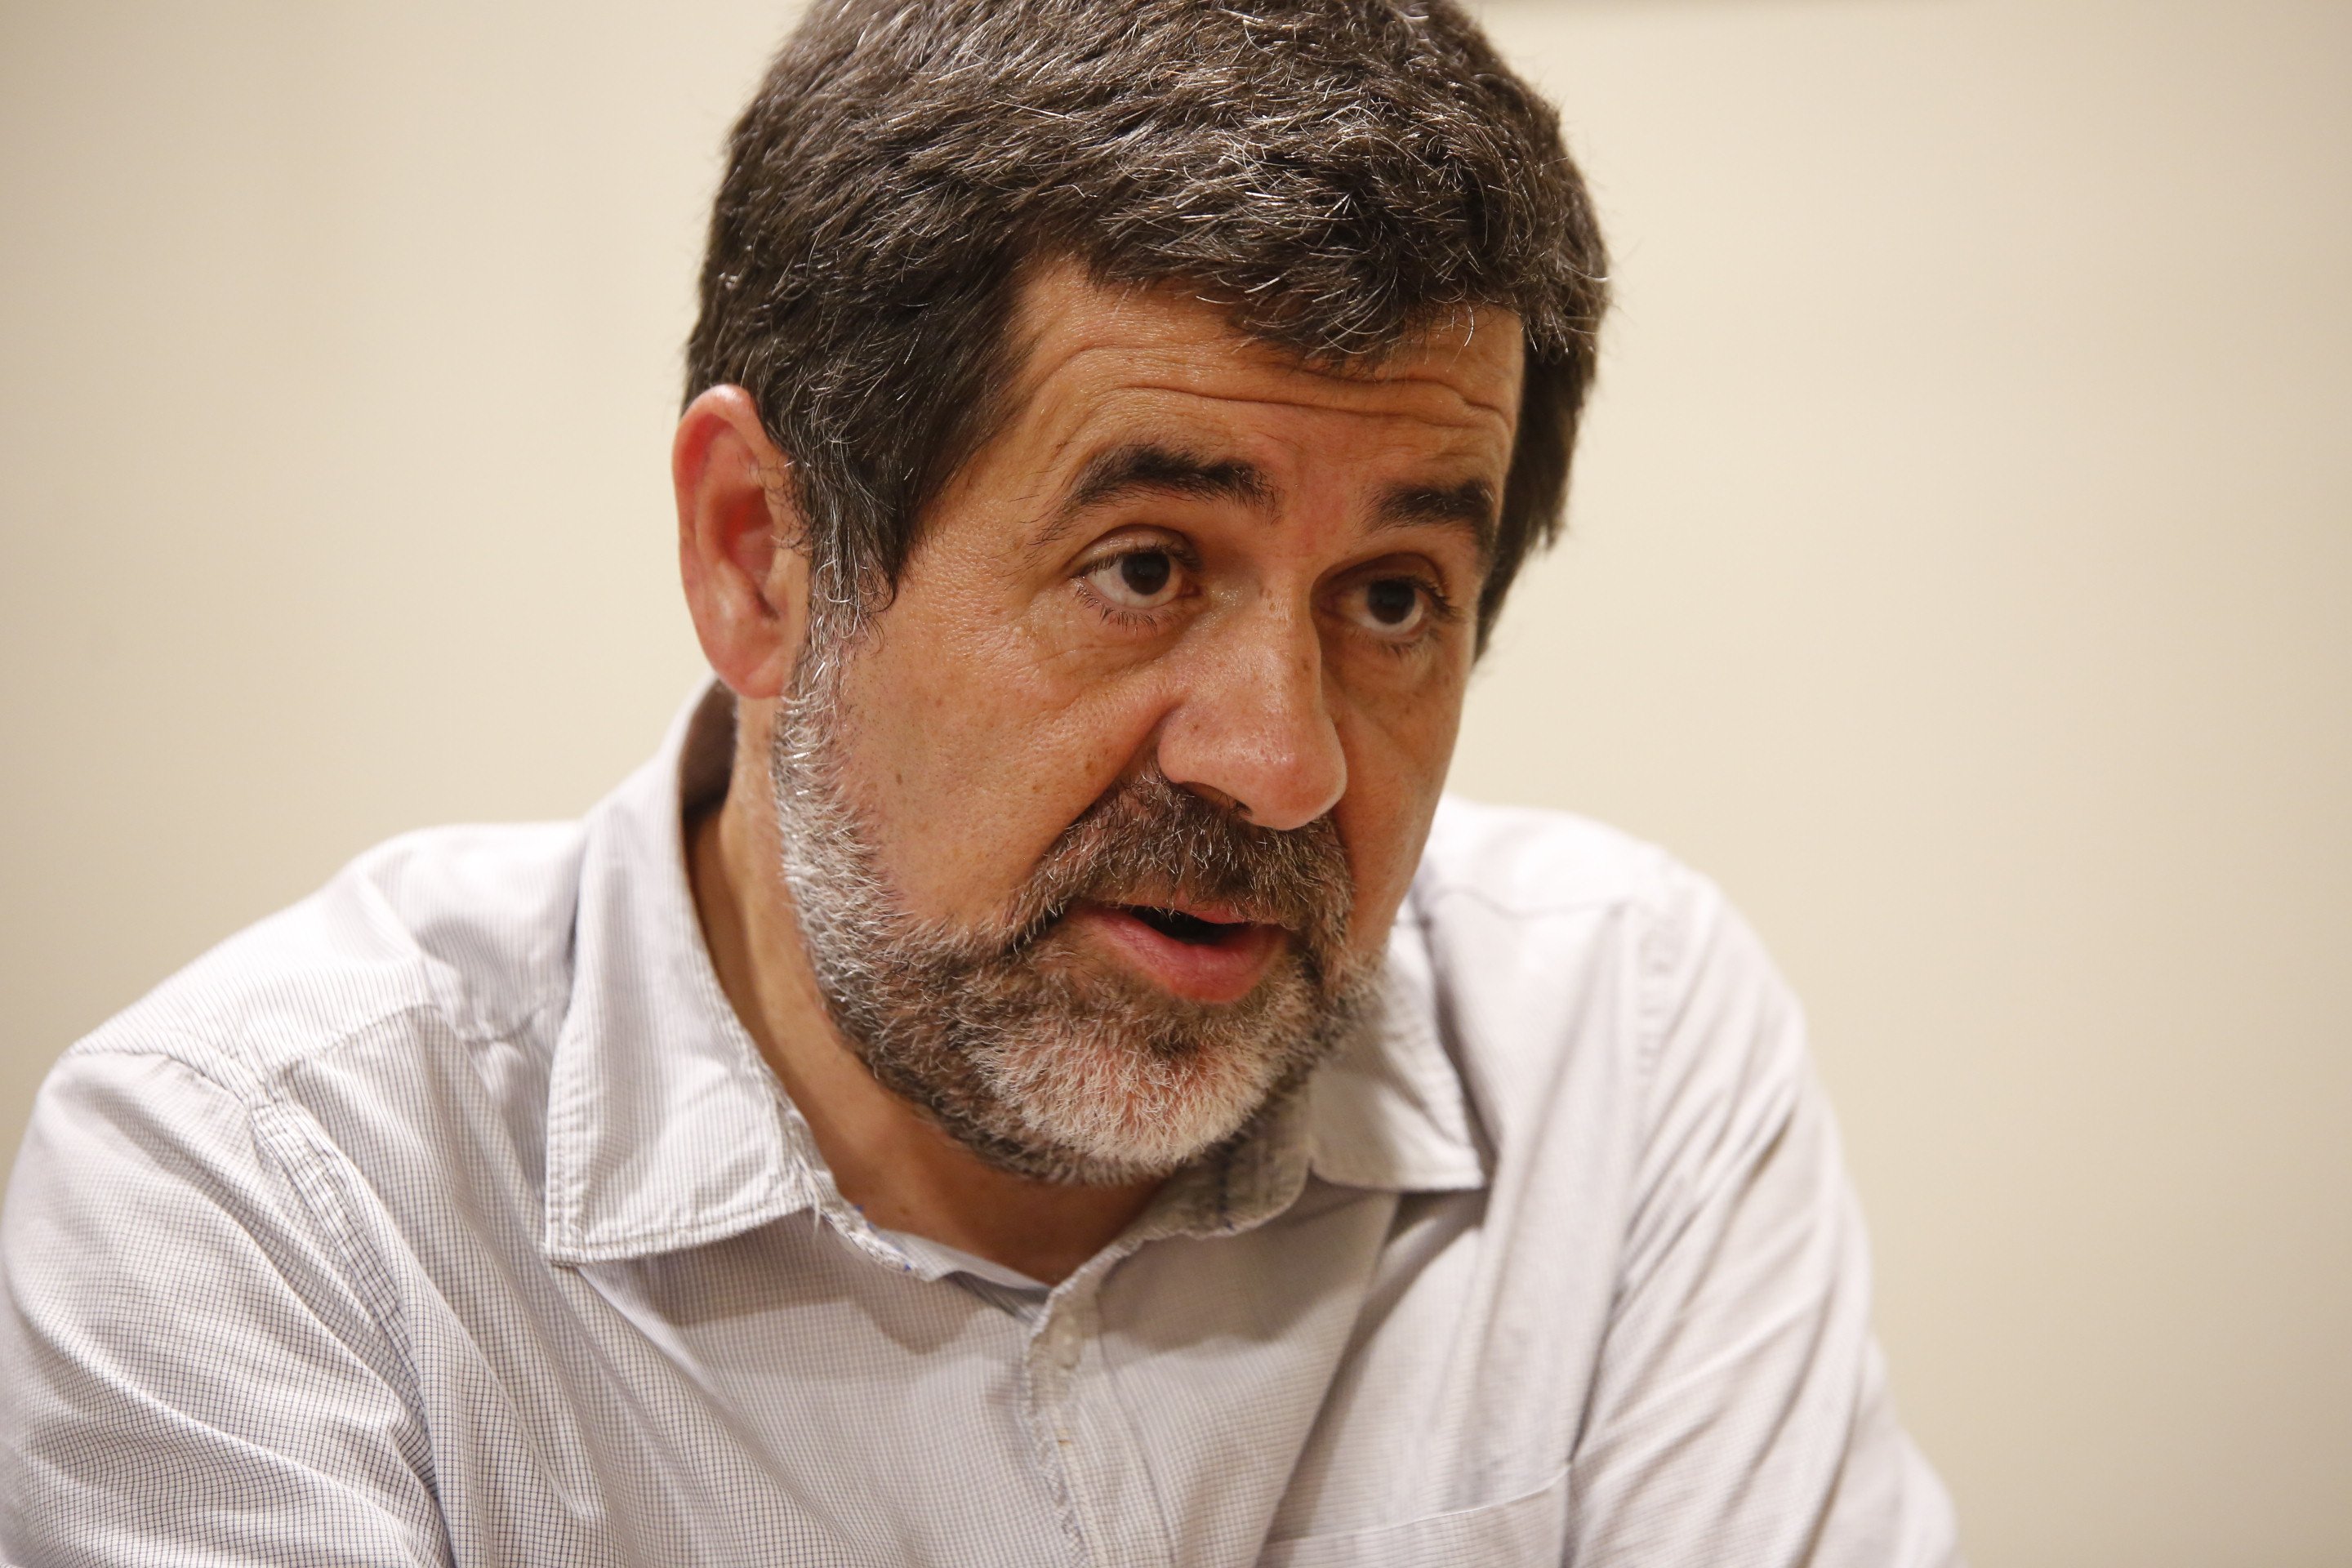 Conversation with Jordi Sànchez, on day 1 of his hunger strike: "This is serious"